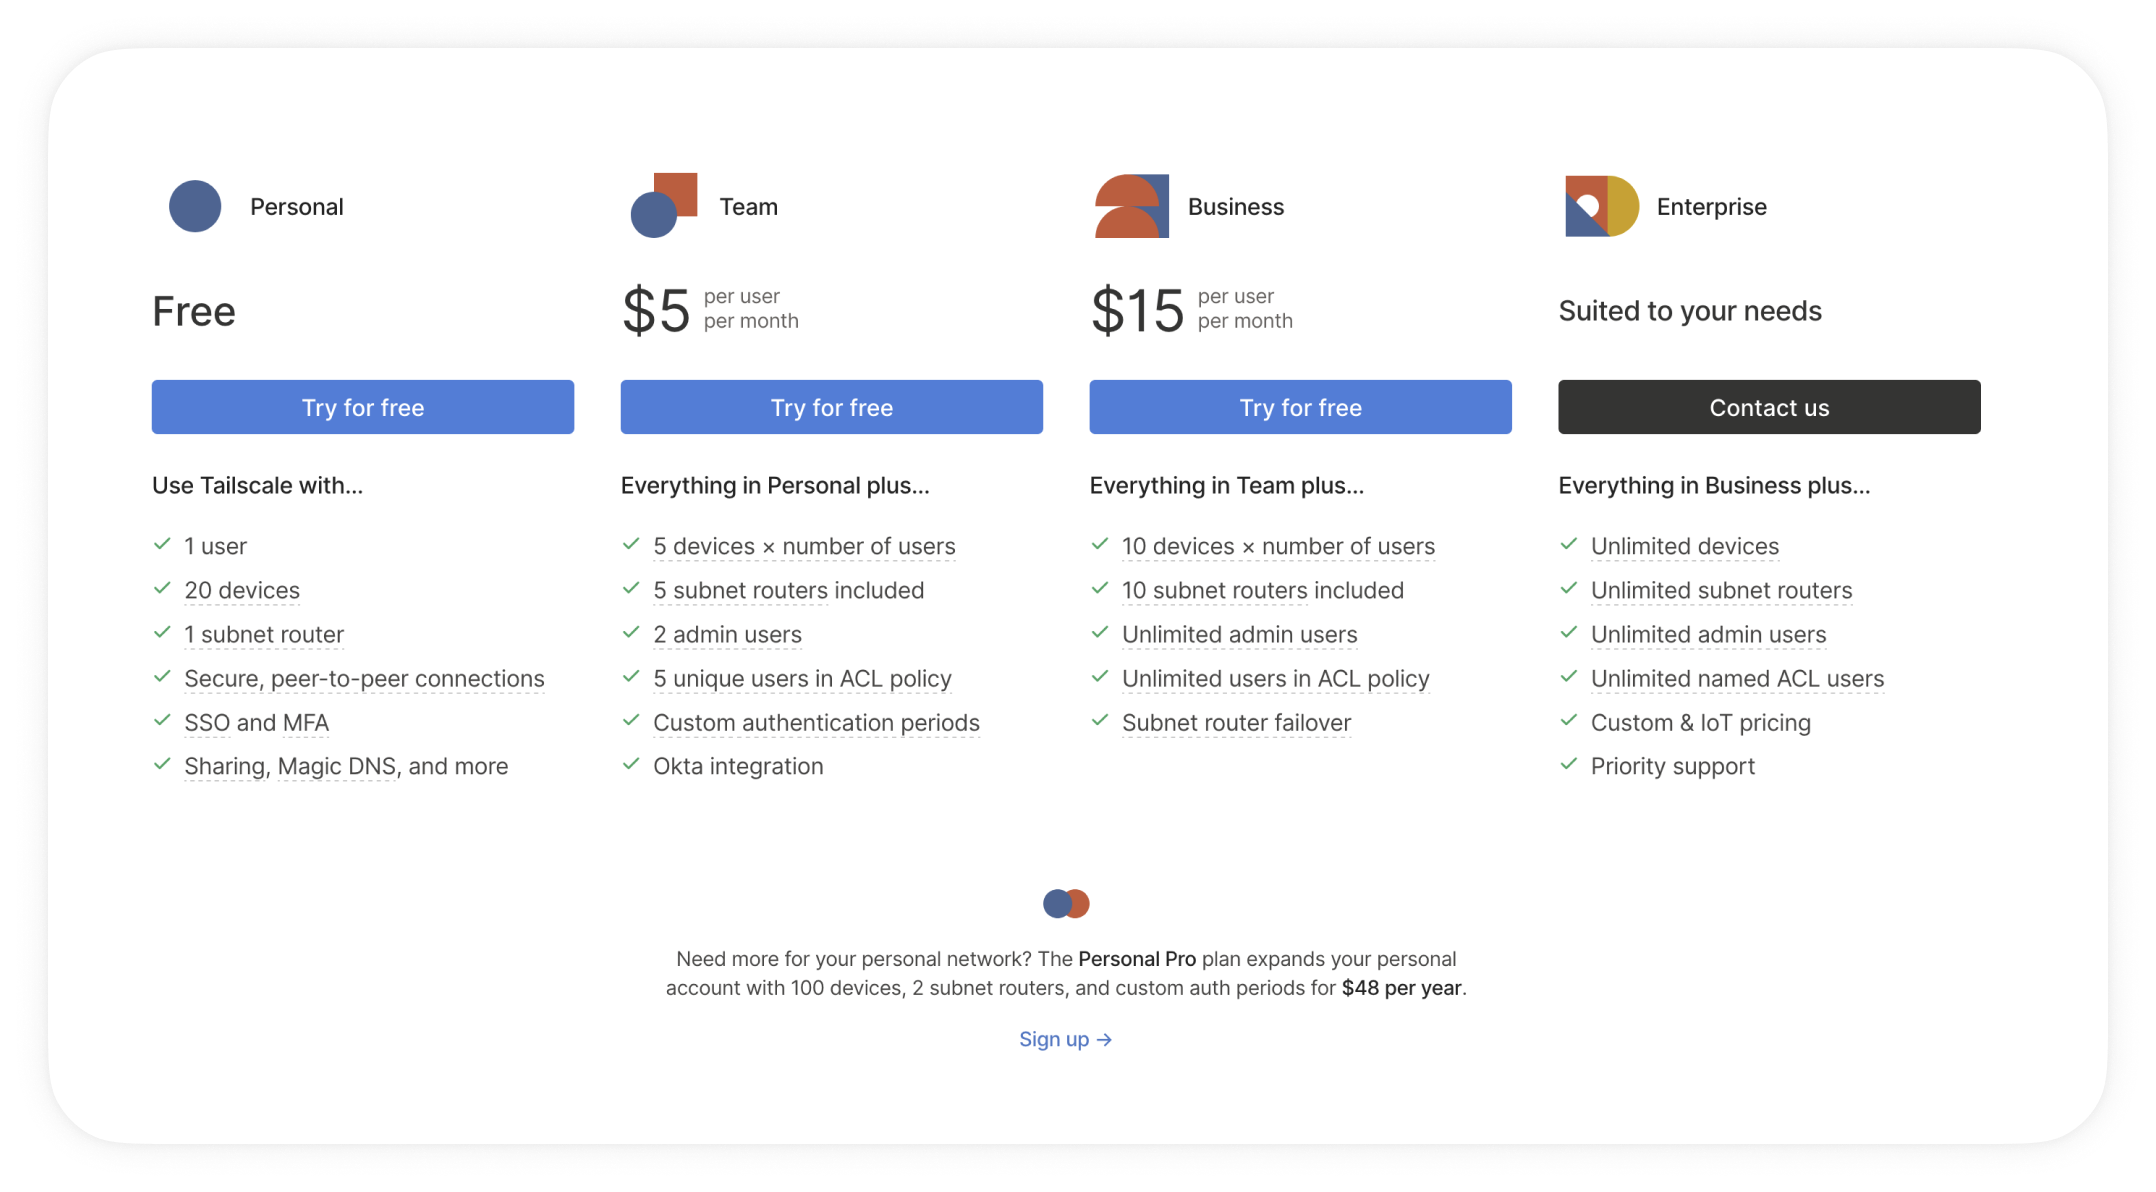 A screenshot of the pricing page, showing the new pricing plans.